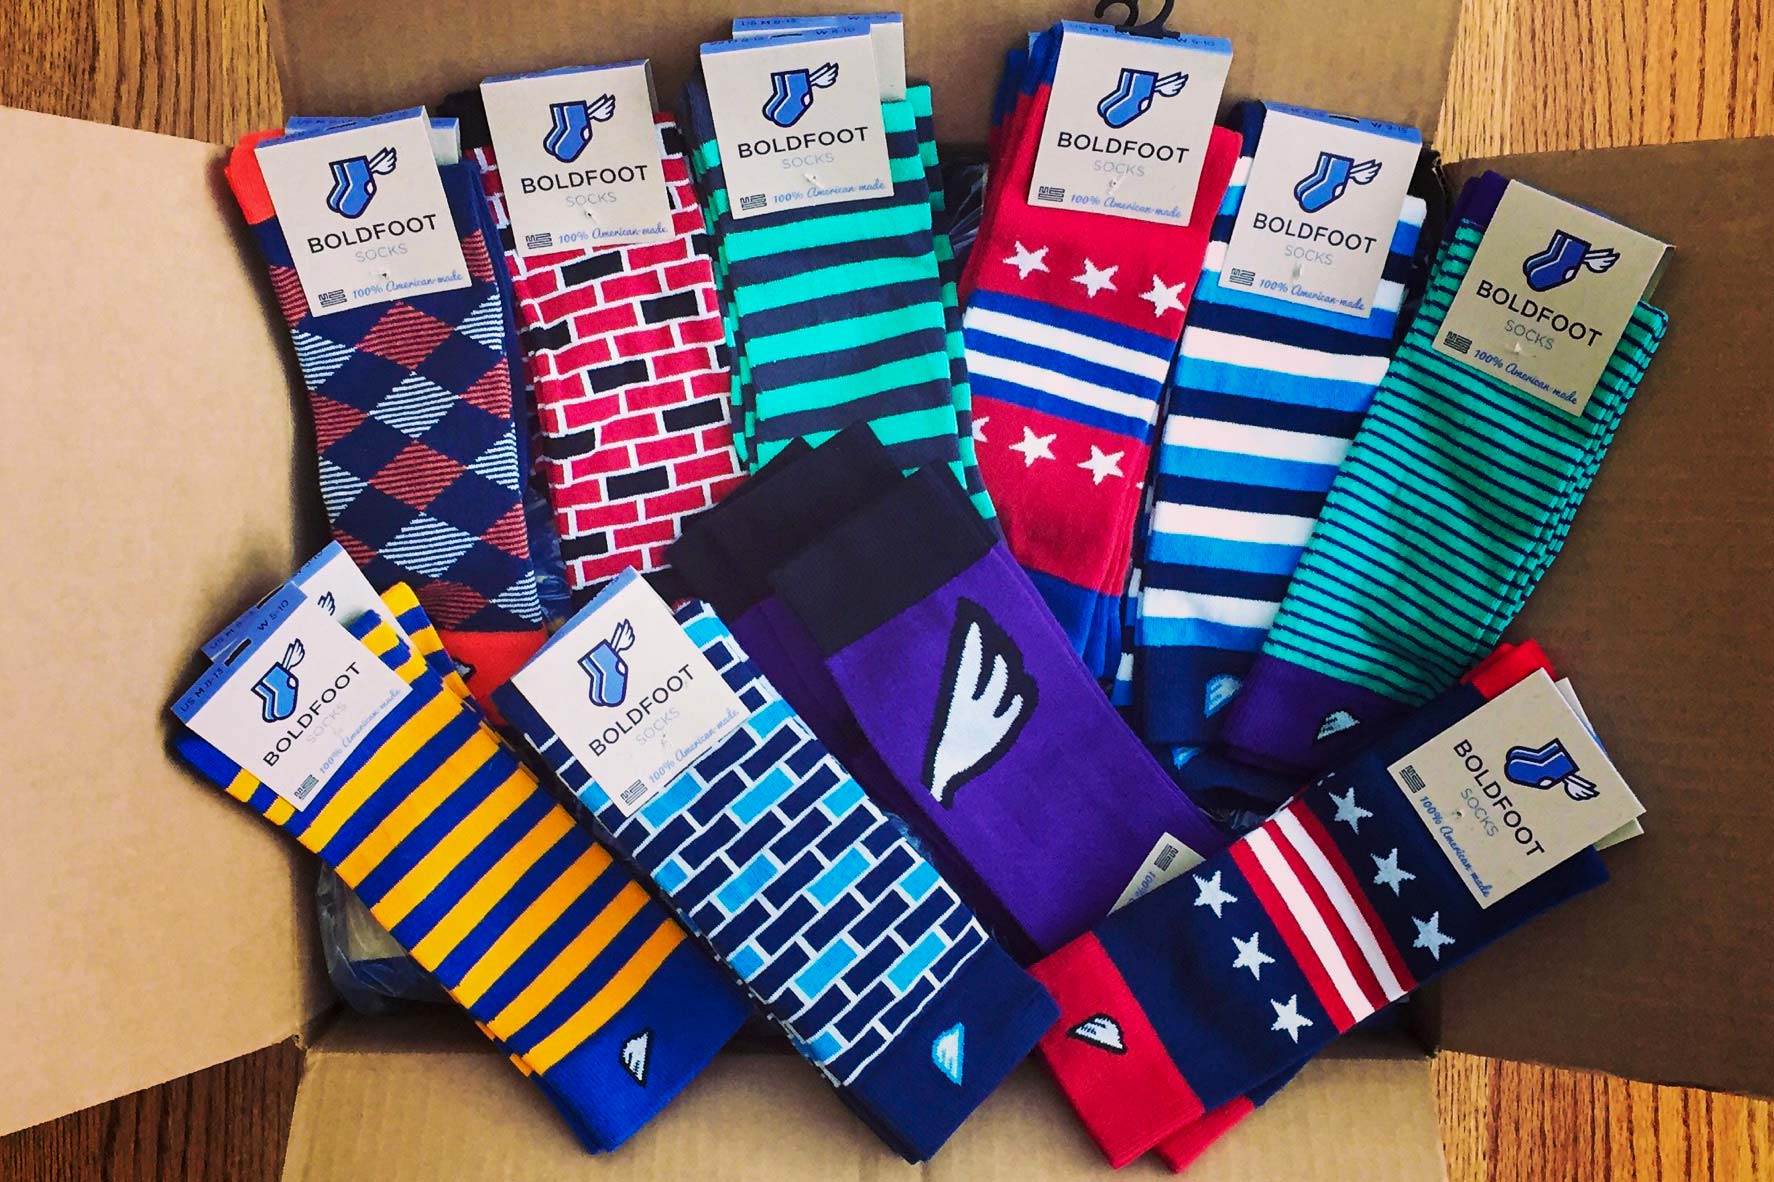 Bold Foot socks with various styles